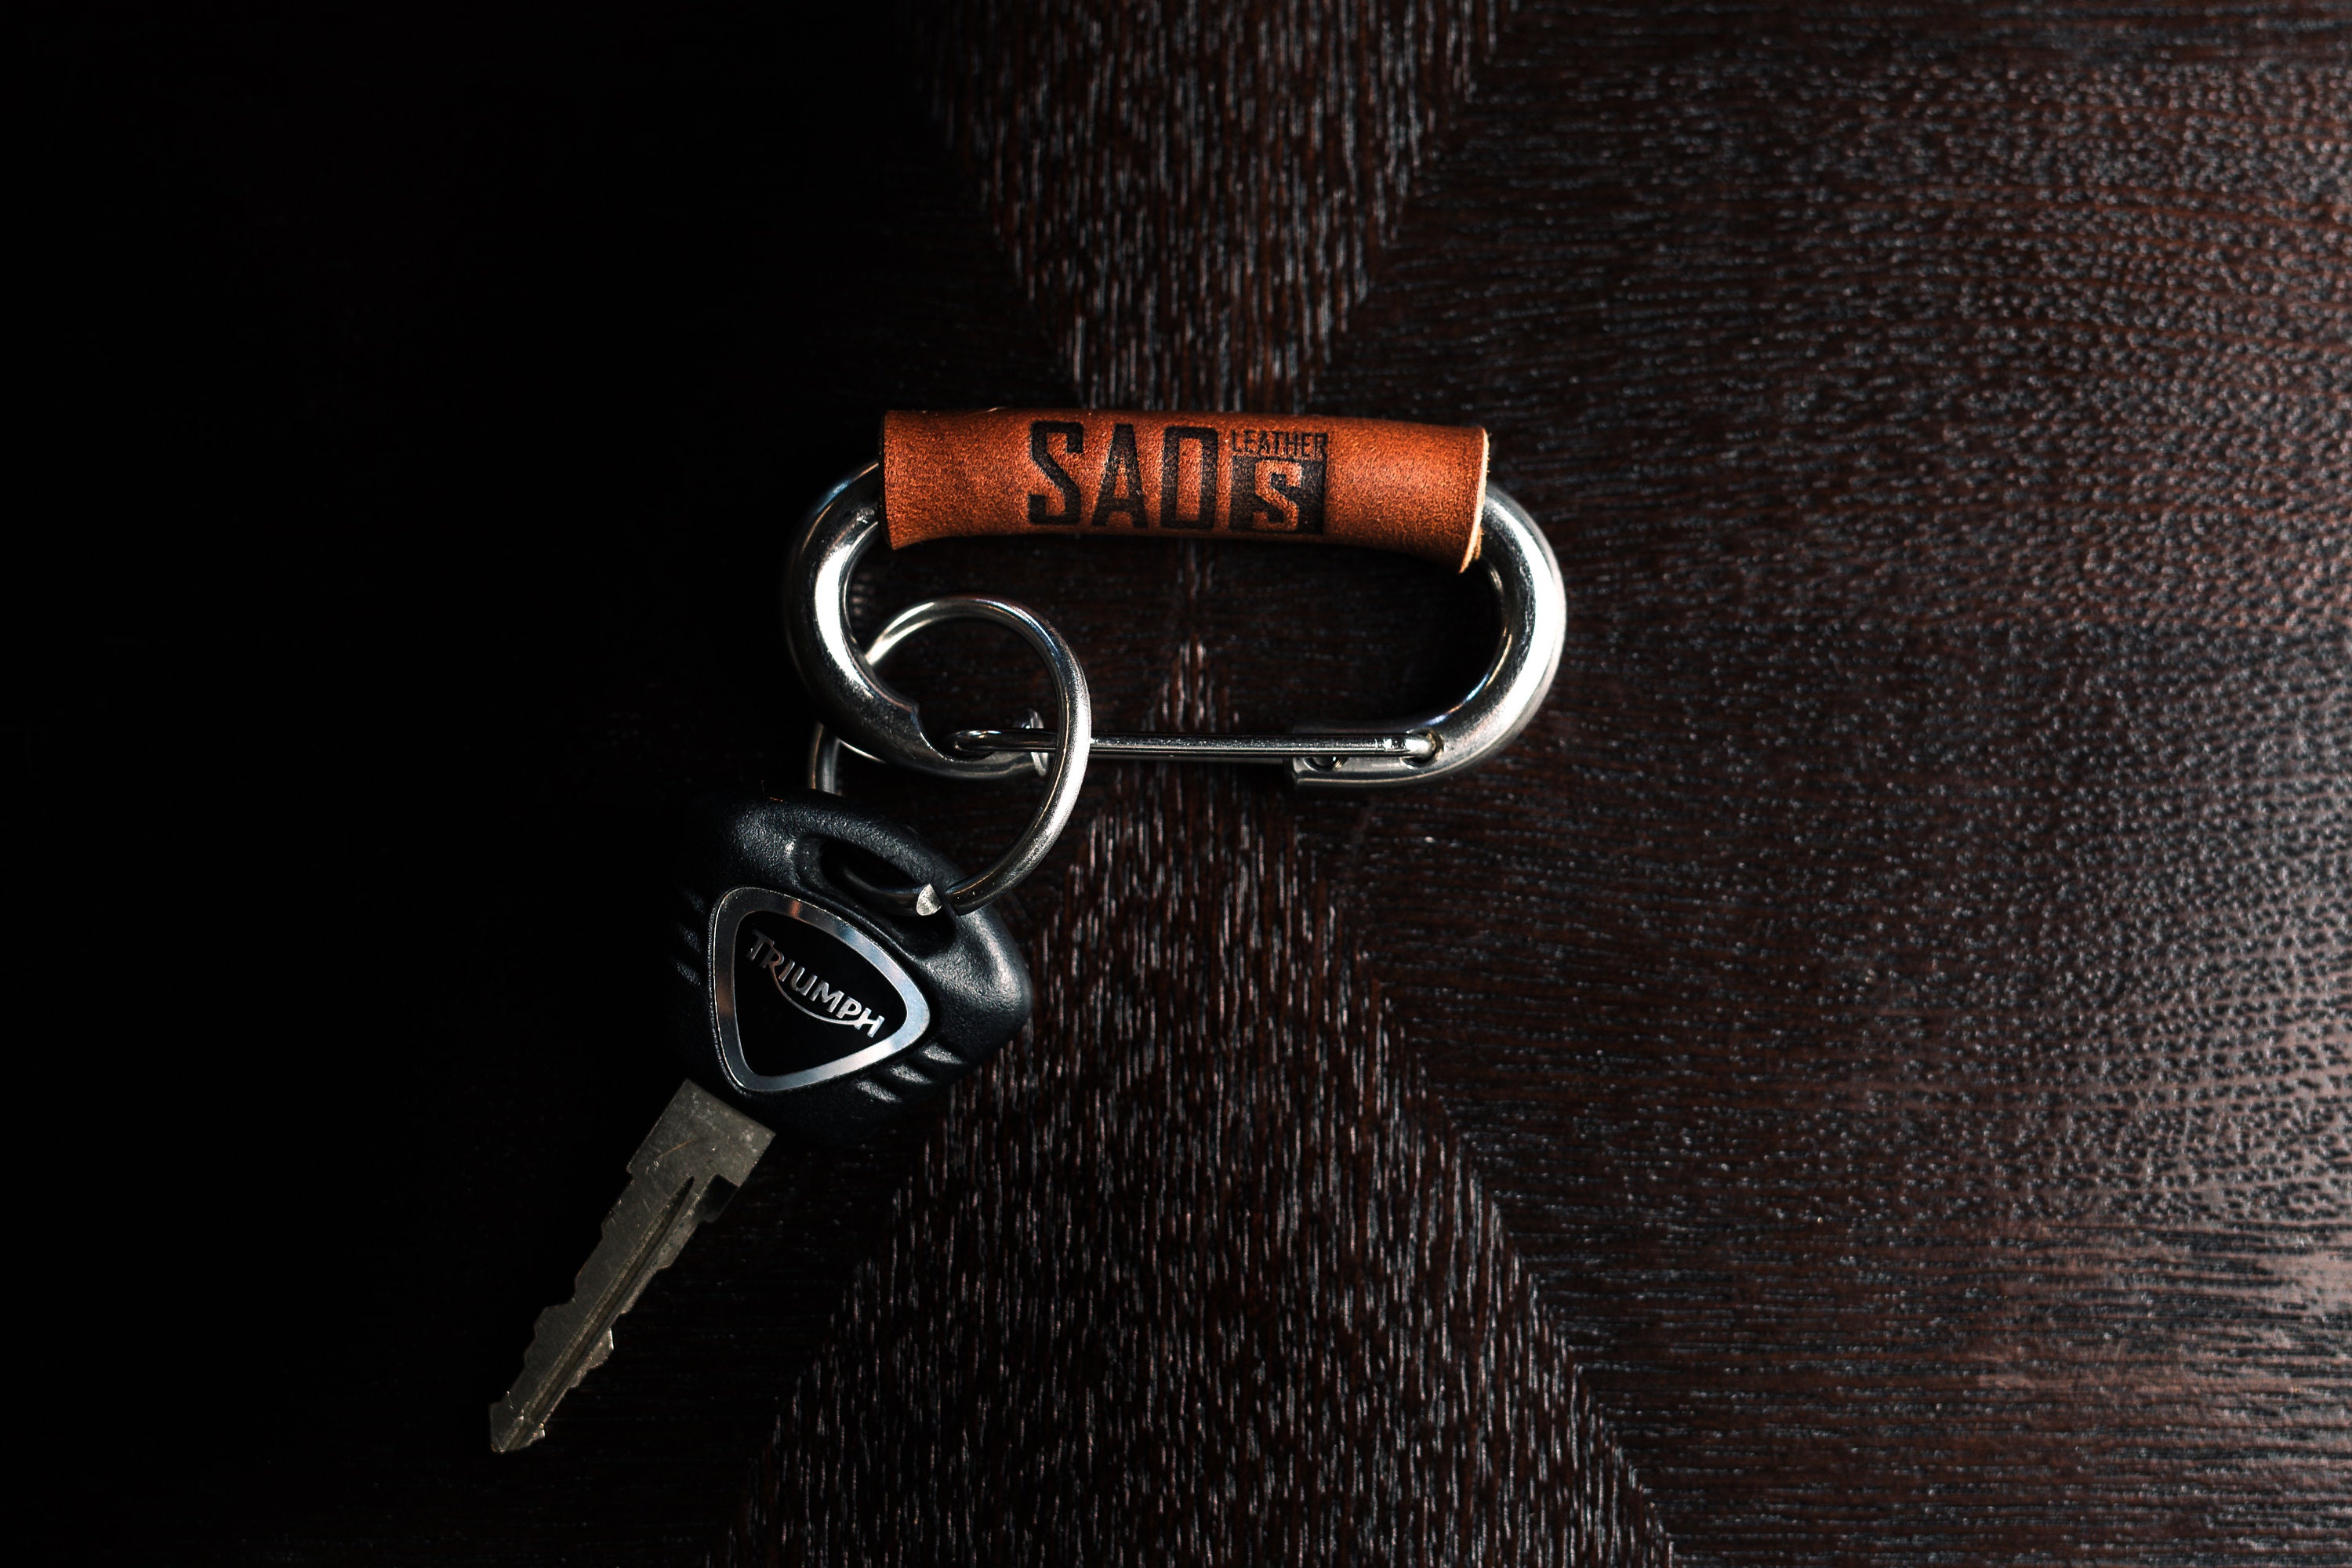 Key Chain - Leather Carabiner, Distressed Brown - Salty Dog T-Shirt Factory